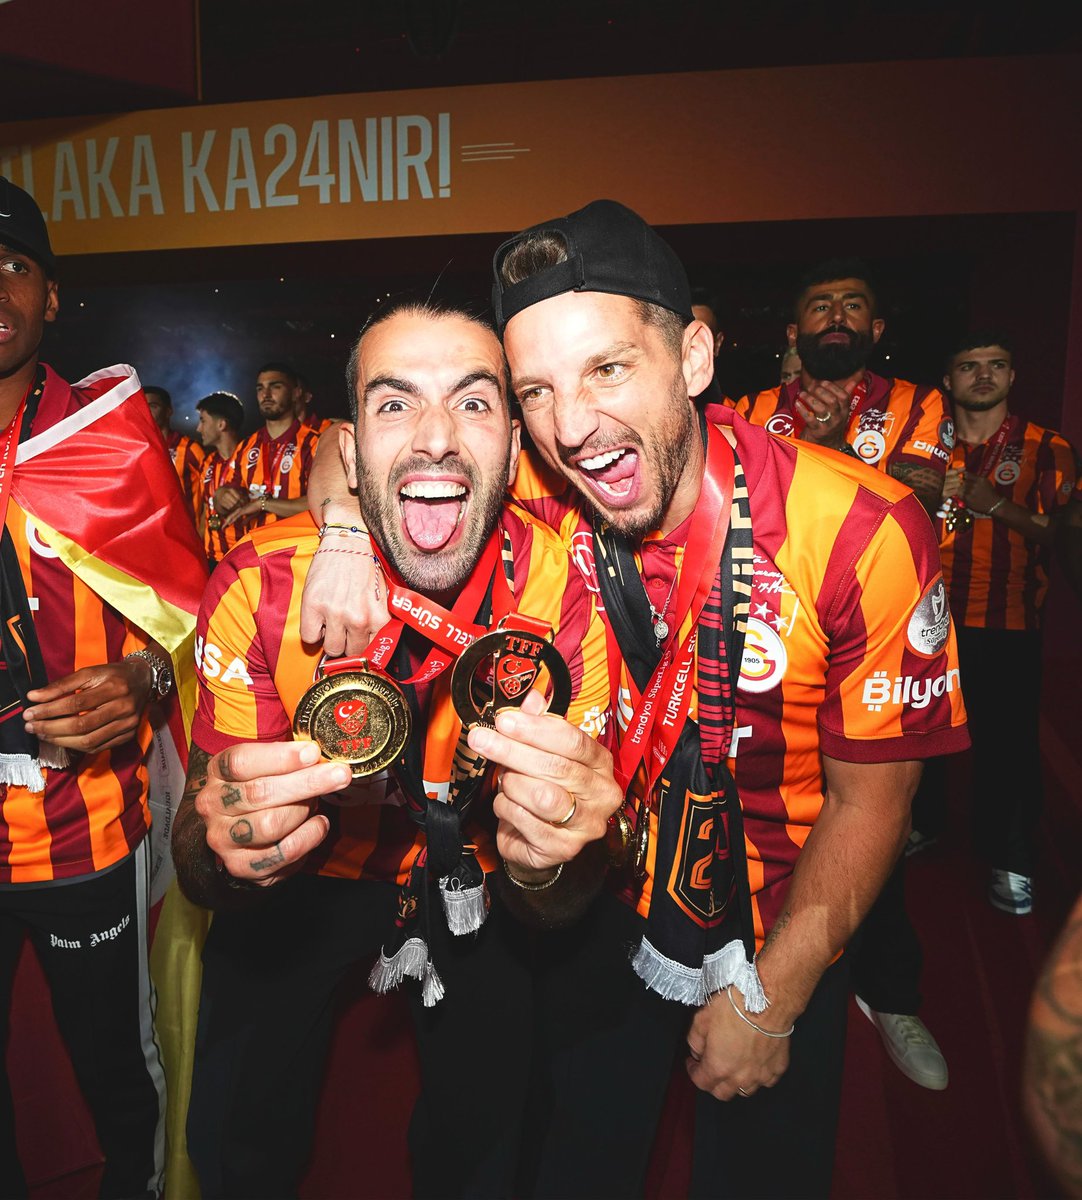 This is what Galatasaray is all about! 🔥 The energy and passion from our fans are unmatched, making these moments nothing short of incredible. They truly showcase the greatness of this club! 🦁 It's an honor to keep winning important titles with this amazing club. 🏆 Thank you!